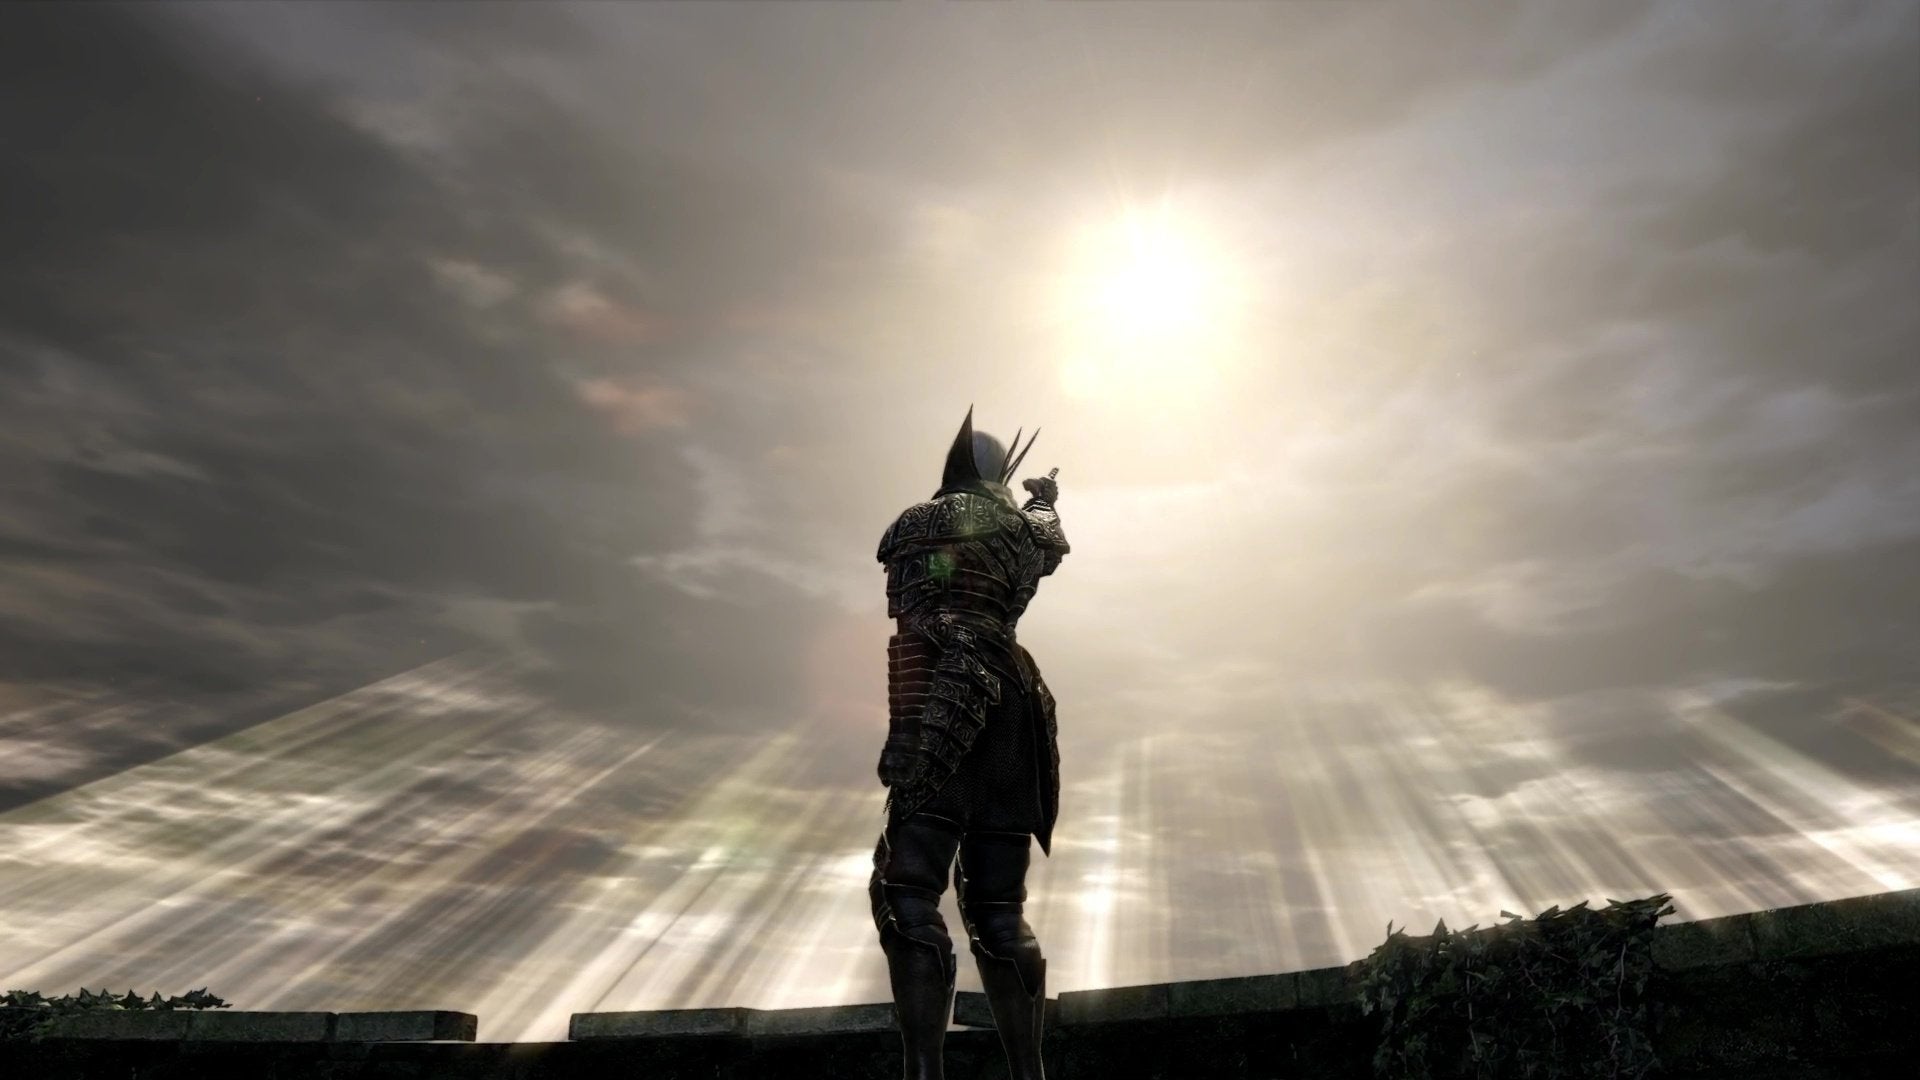 The Chosen Undead pointing at the sun in Dark Souls.